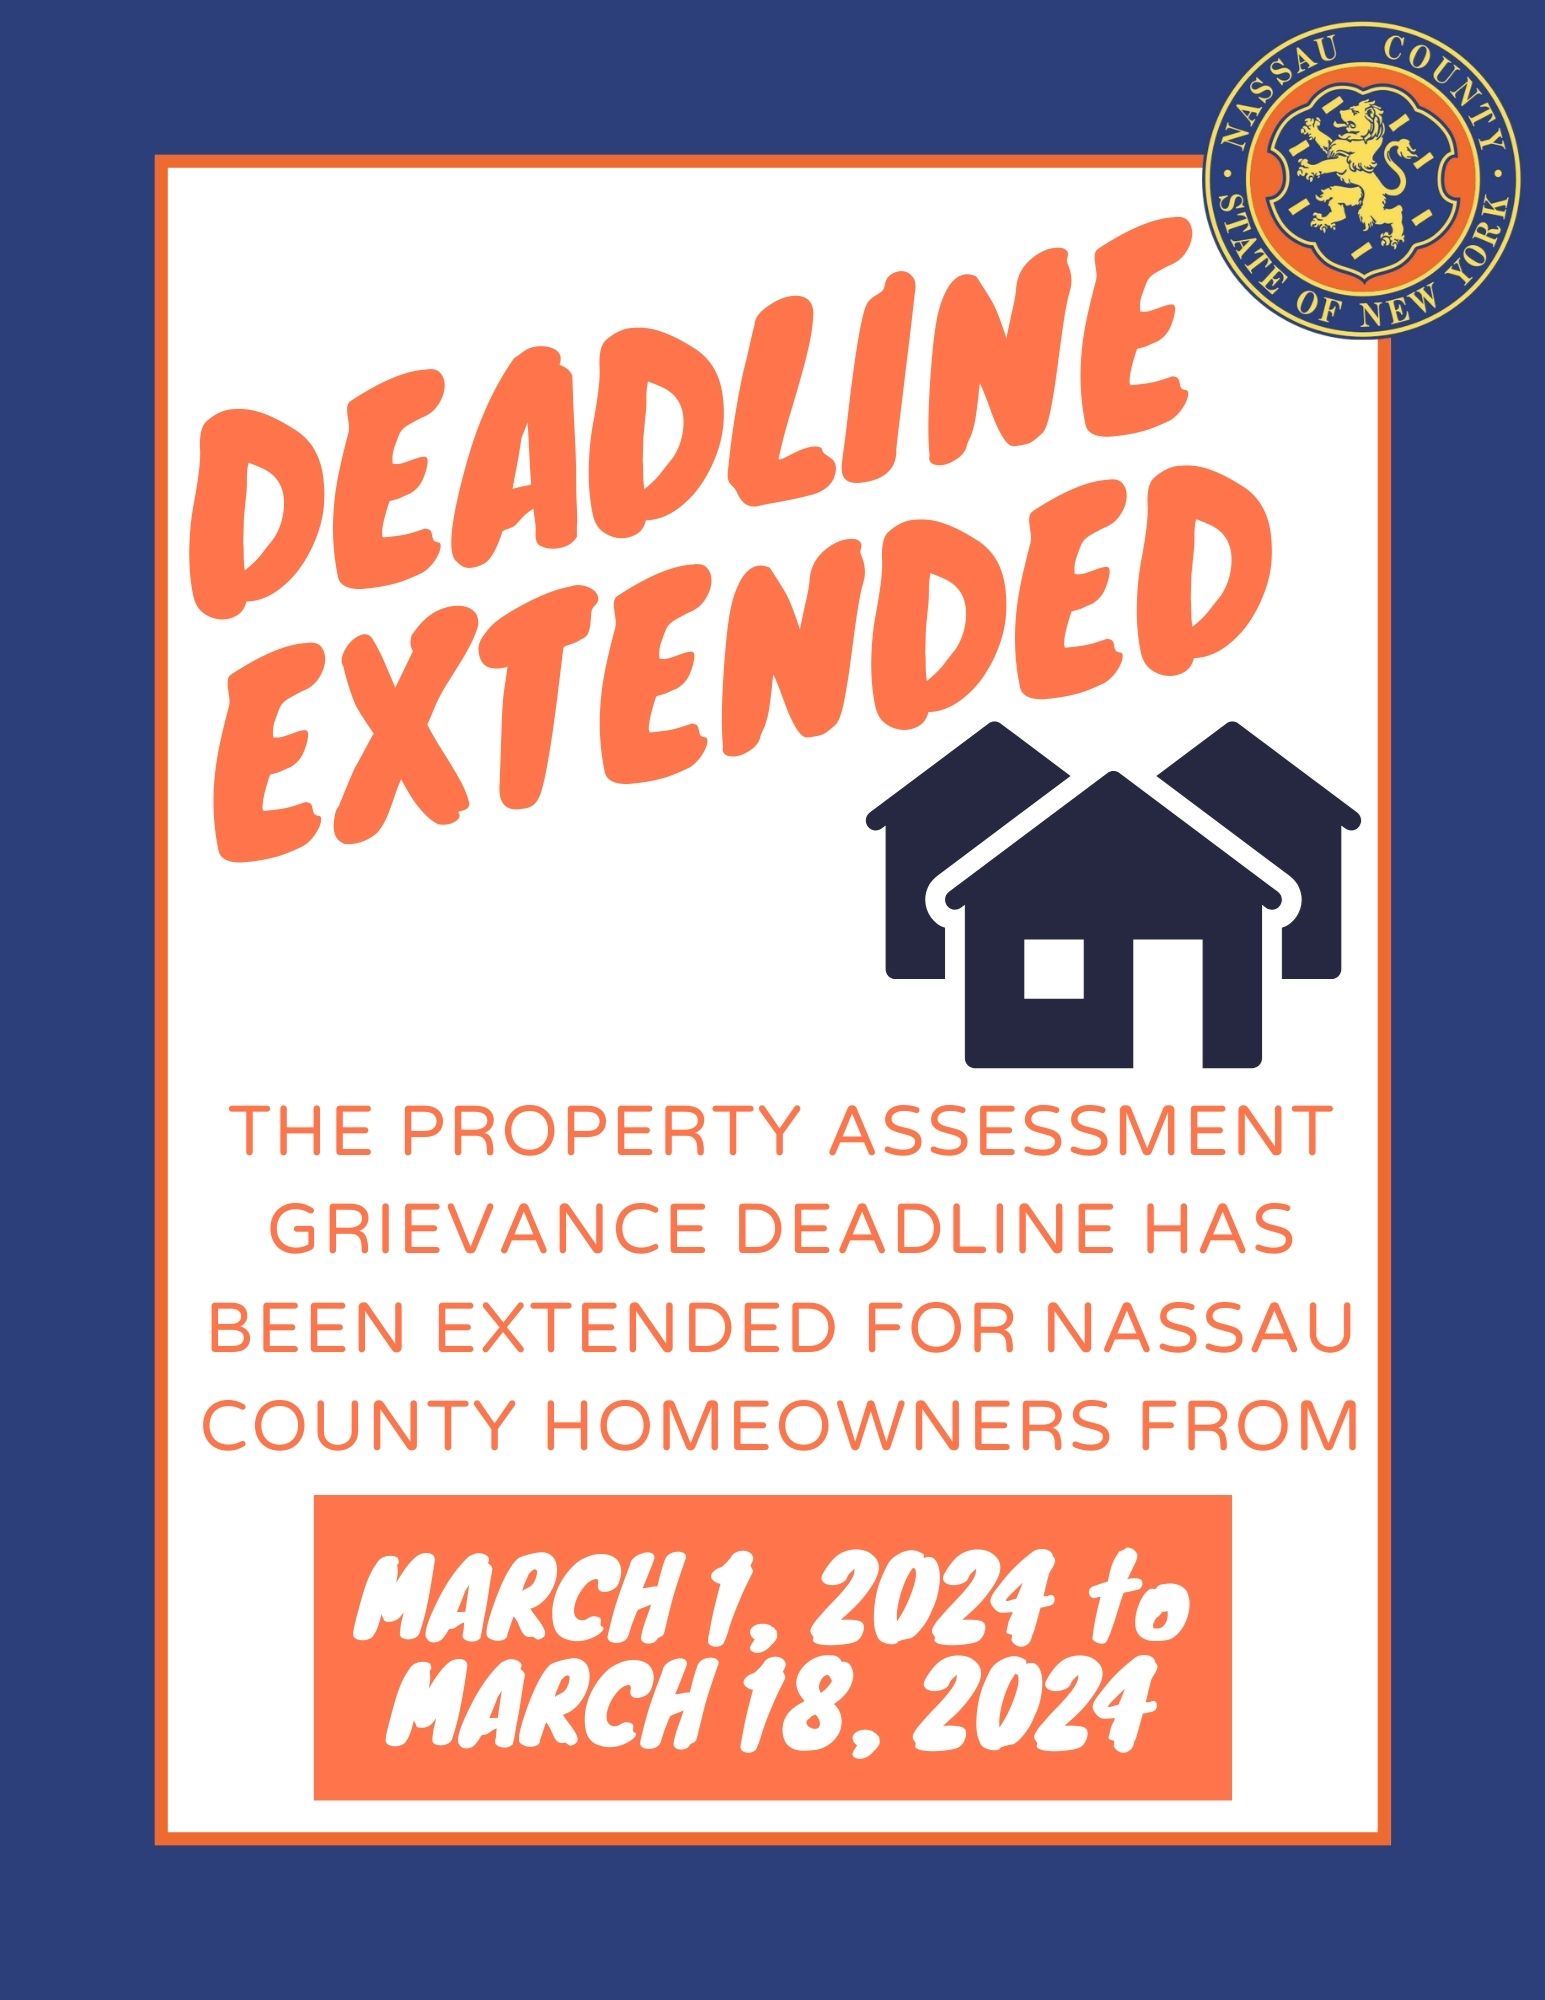 ARC Grievance deadline has been extended to March 18, 2024